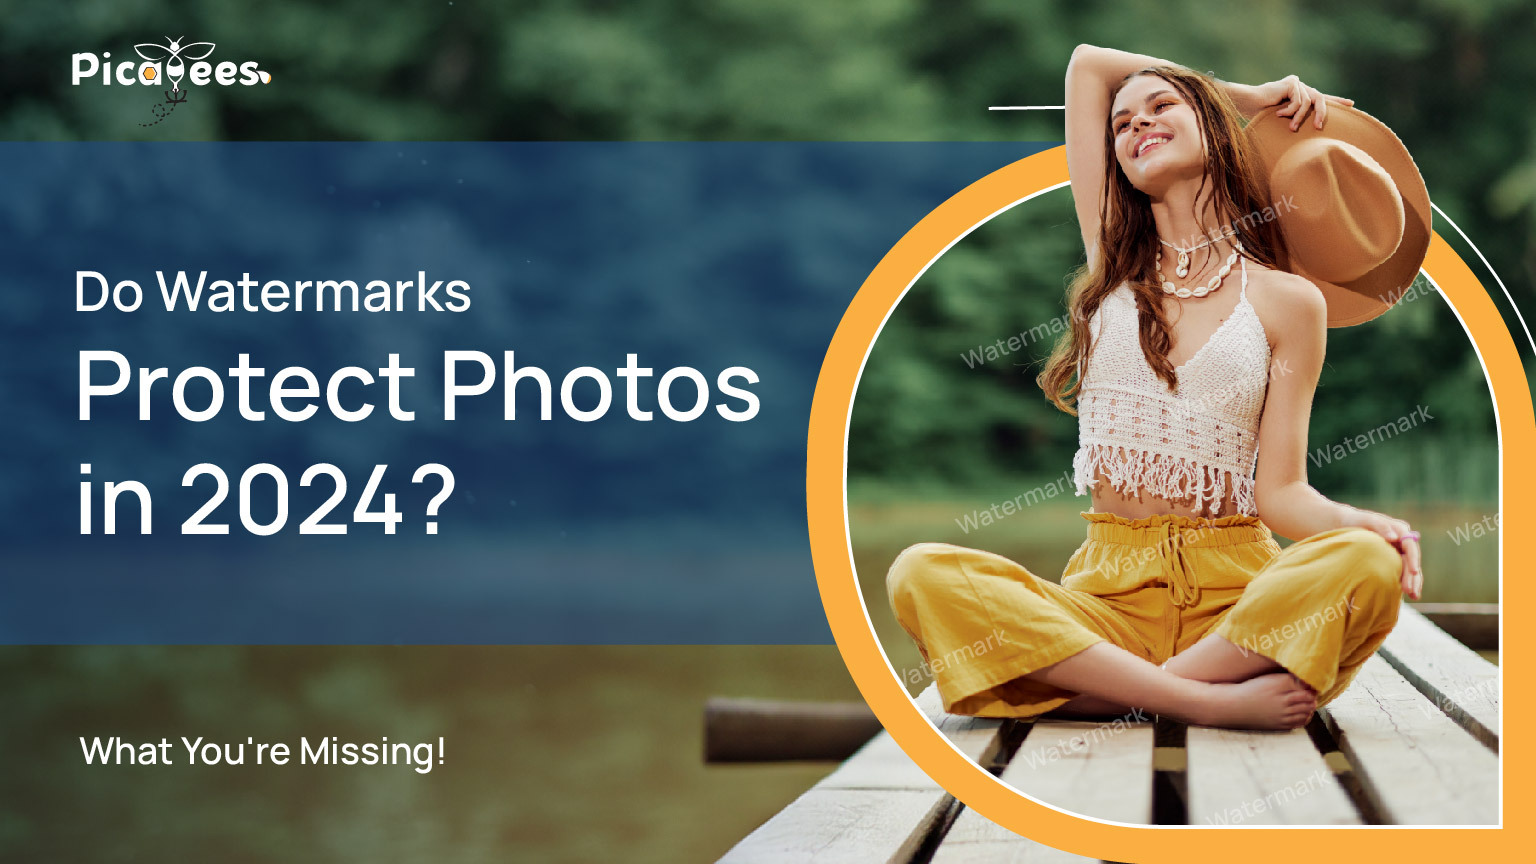 Do Watermarks Protect Photos?